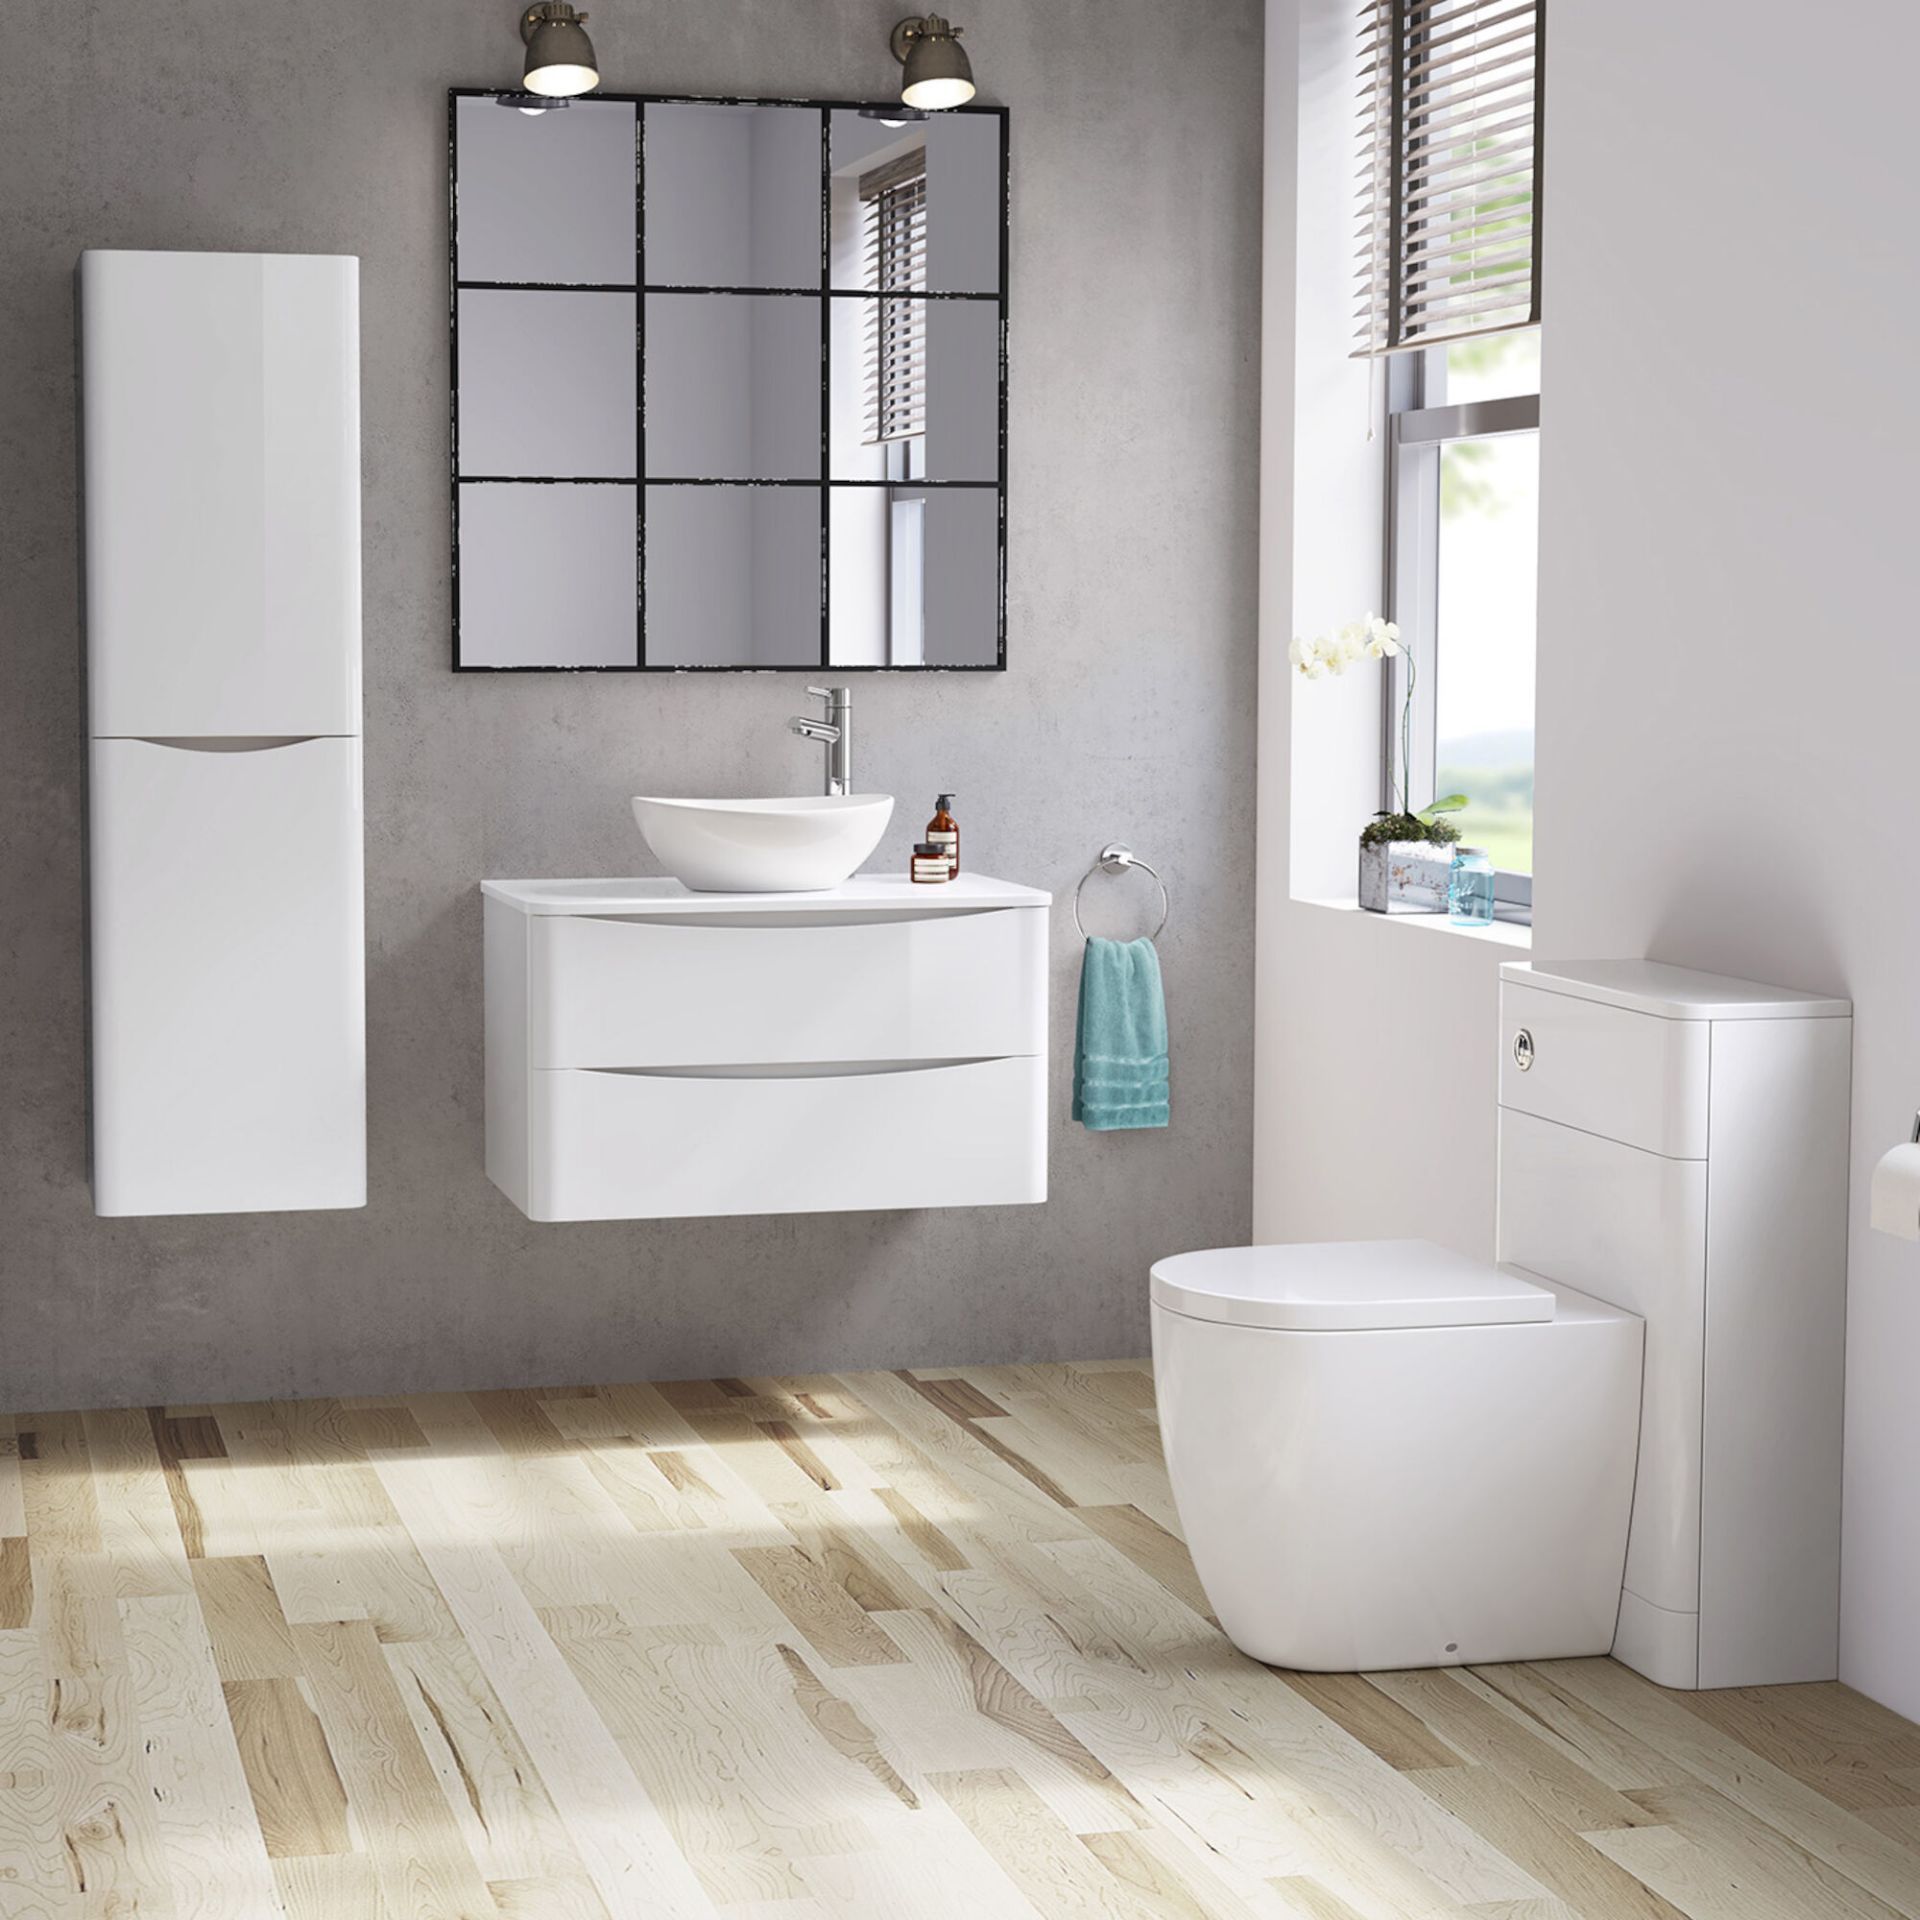 NEW & BOXED 1000mm Austin II Gloss White Countertop Unit and Camila Basin - Wall Hung. RRP £89... - Image 2 of 3